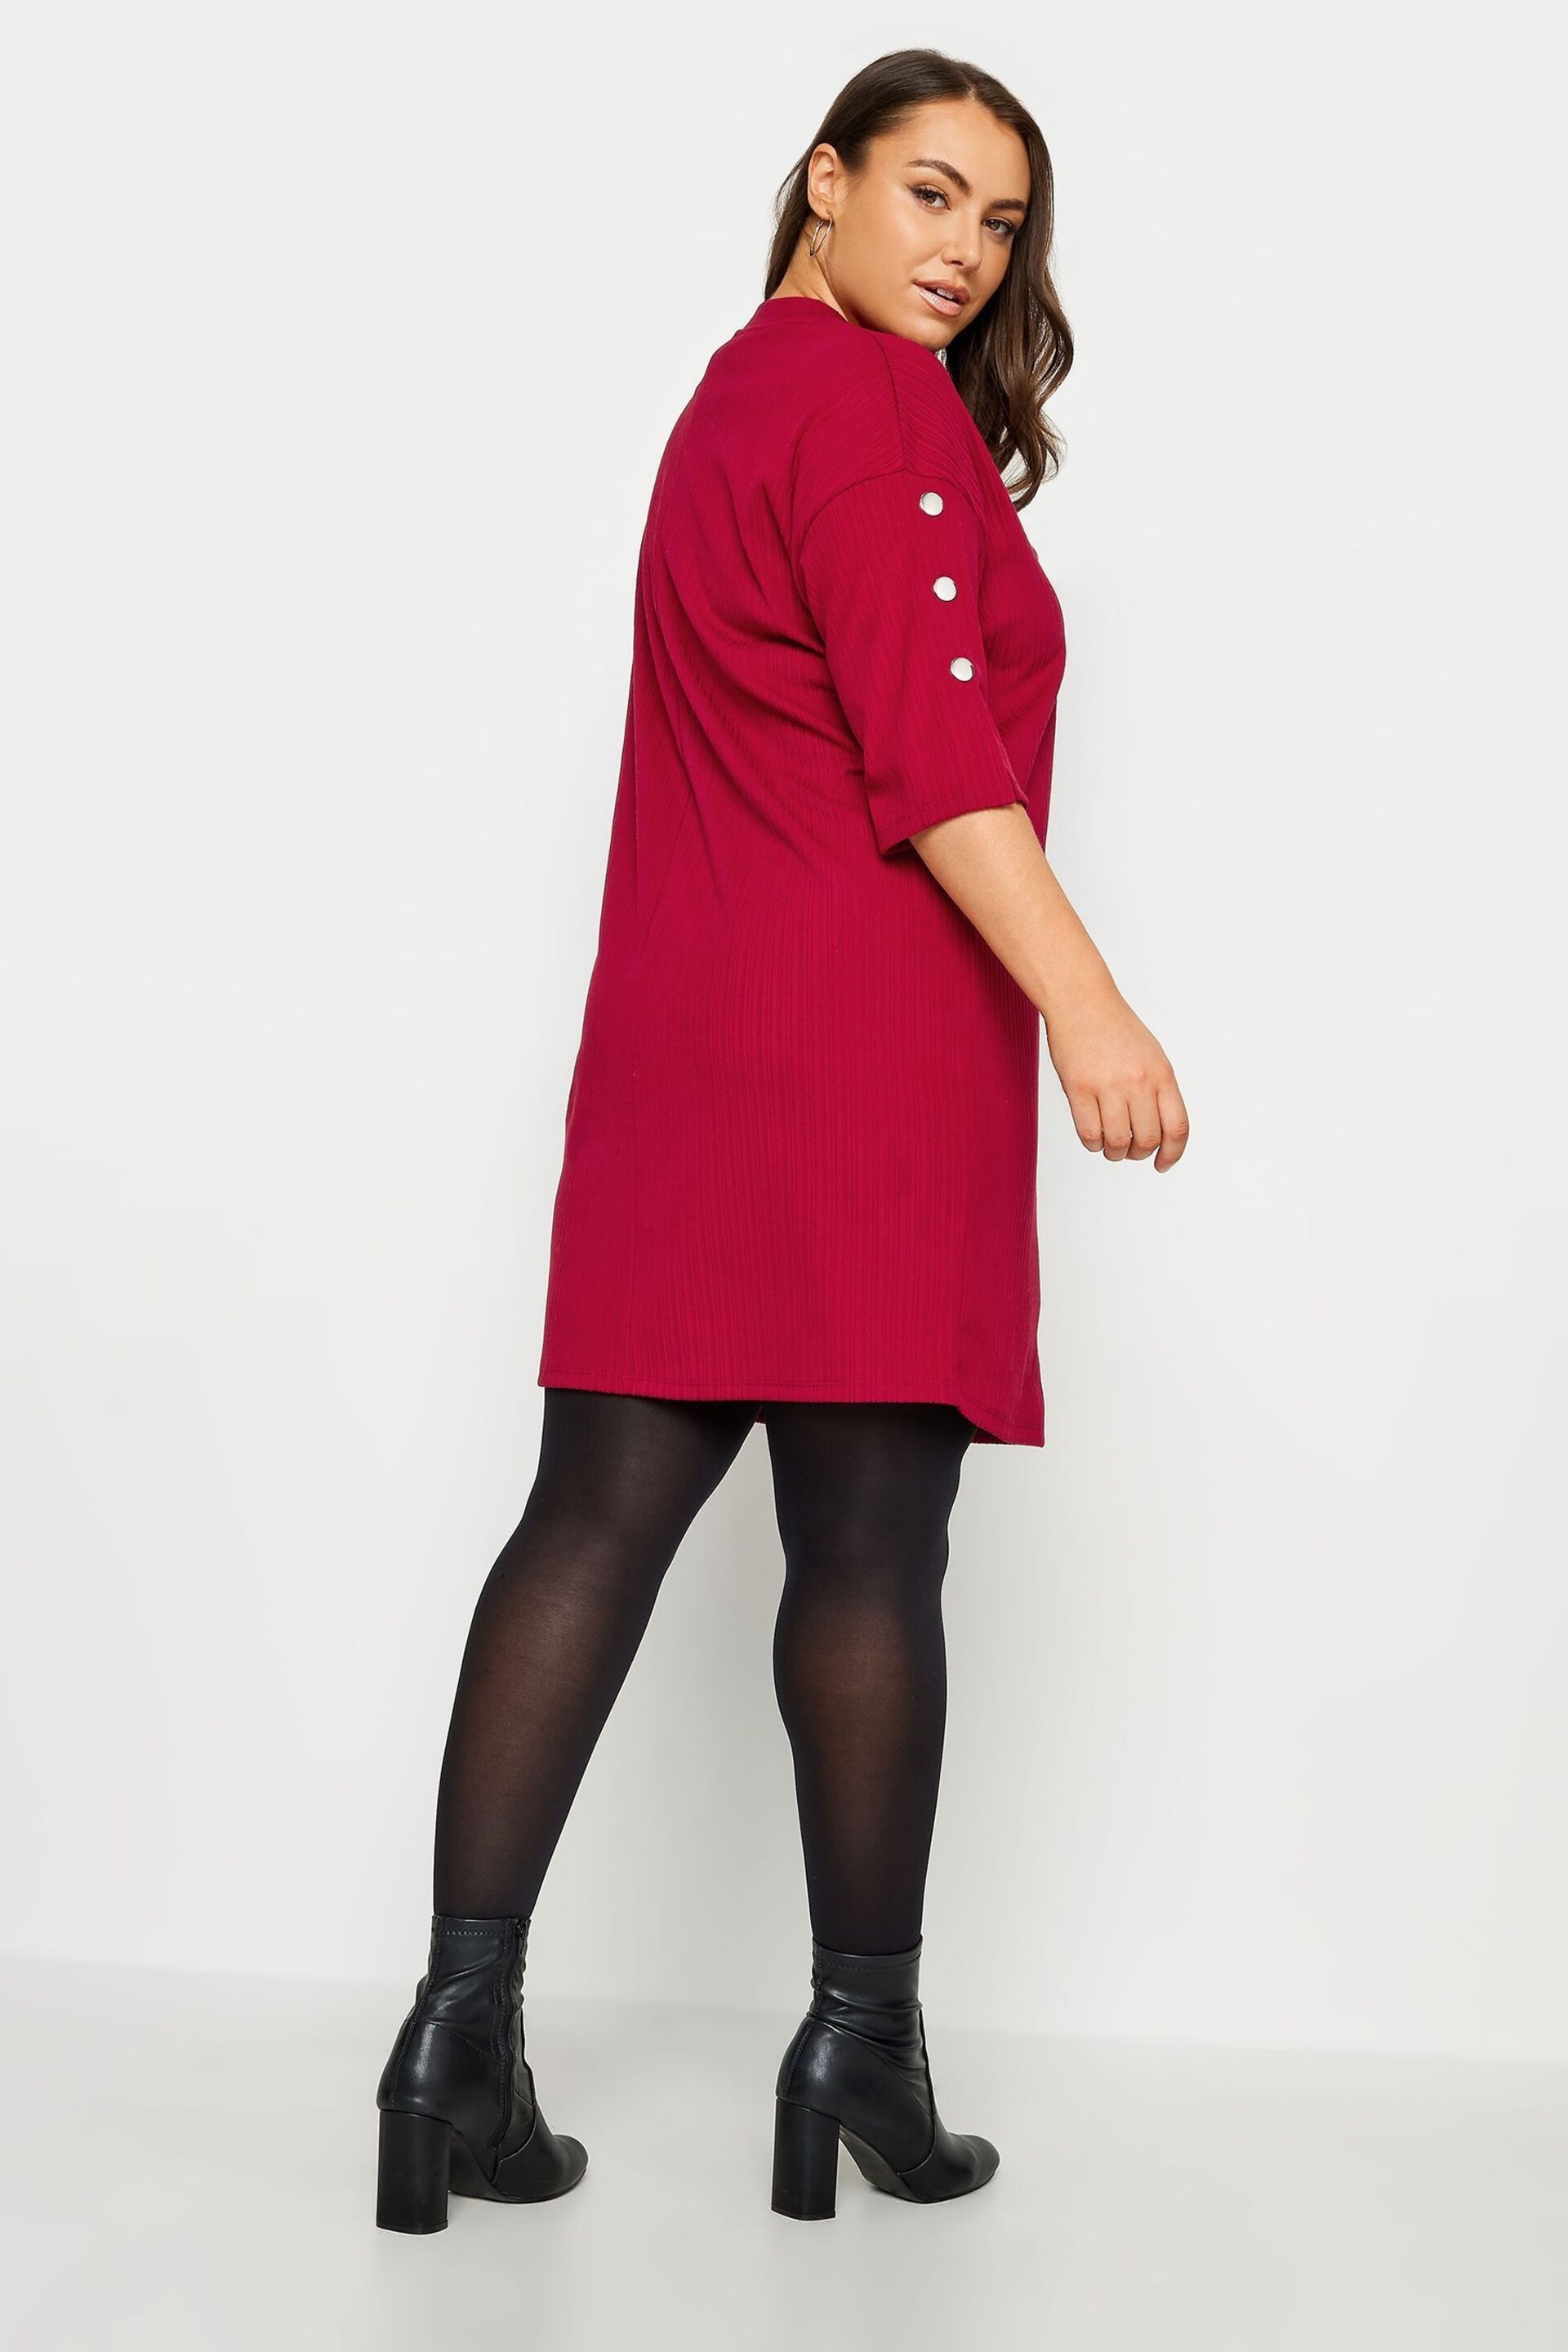 Yours Curve Red Long Sleeve Button Soft Touch Dress - Image 3 of 4